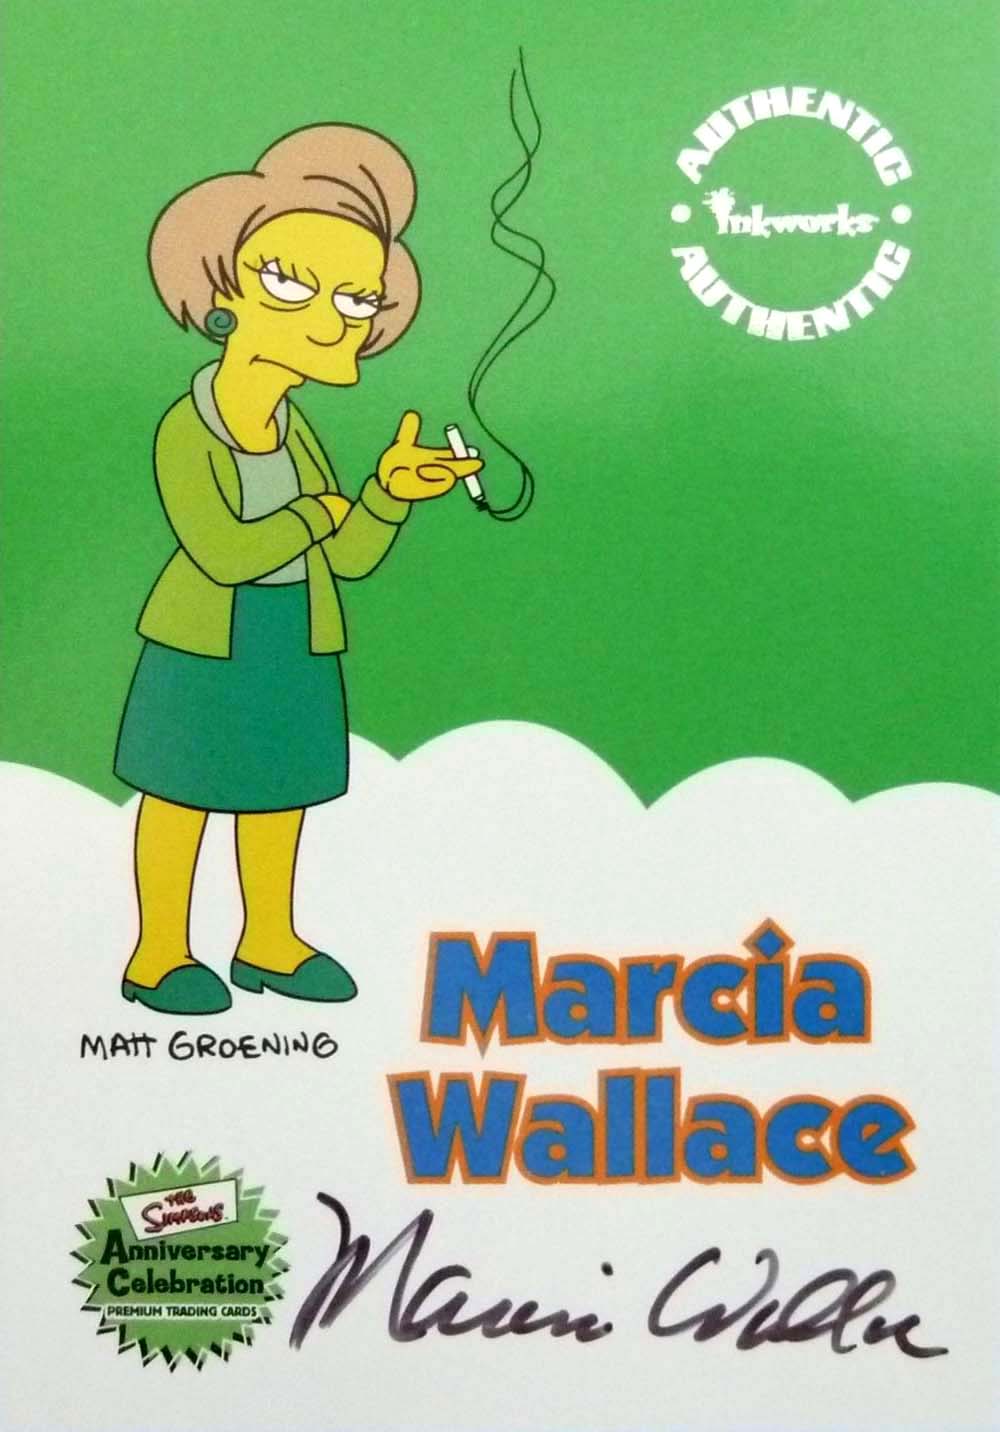  Marcia Wallace player image